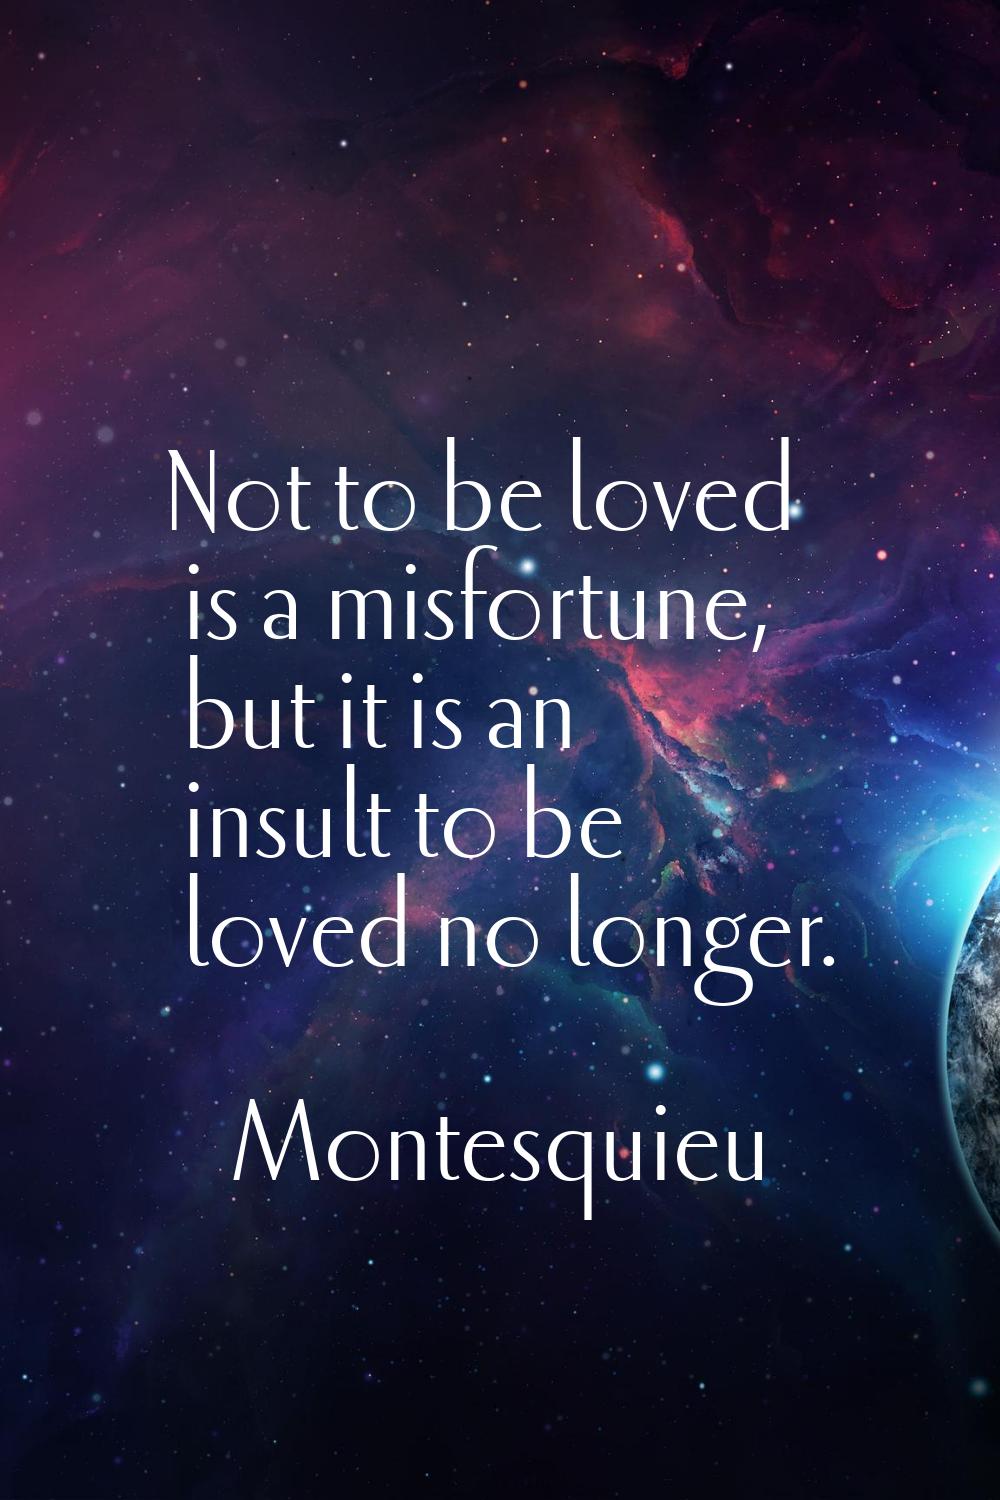 Not to be loved is a misfortune, but it is an insult to be loved no longer.